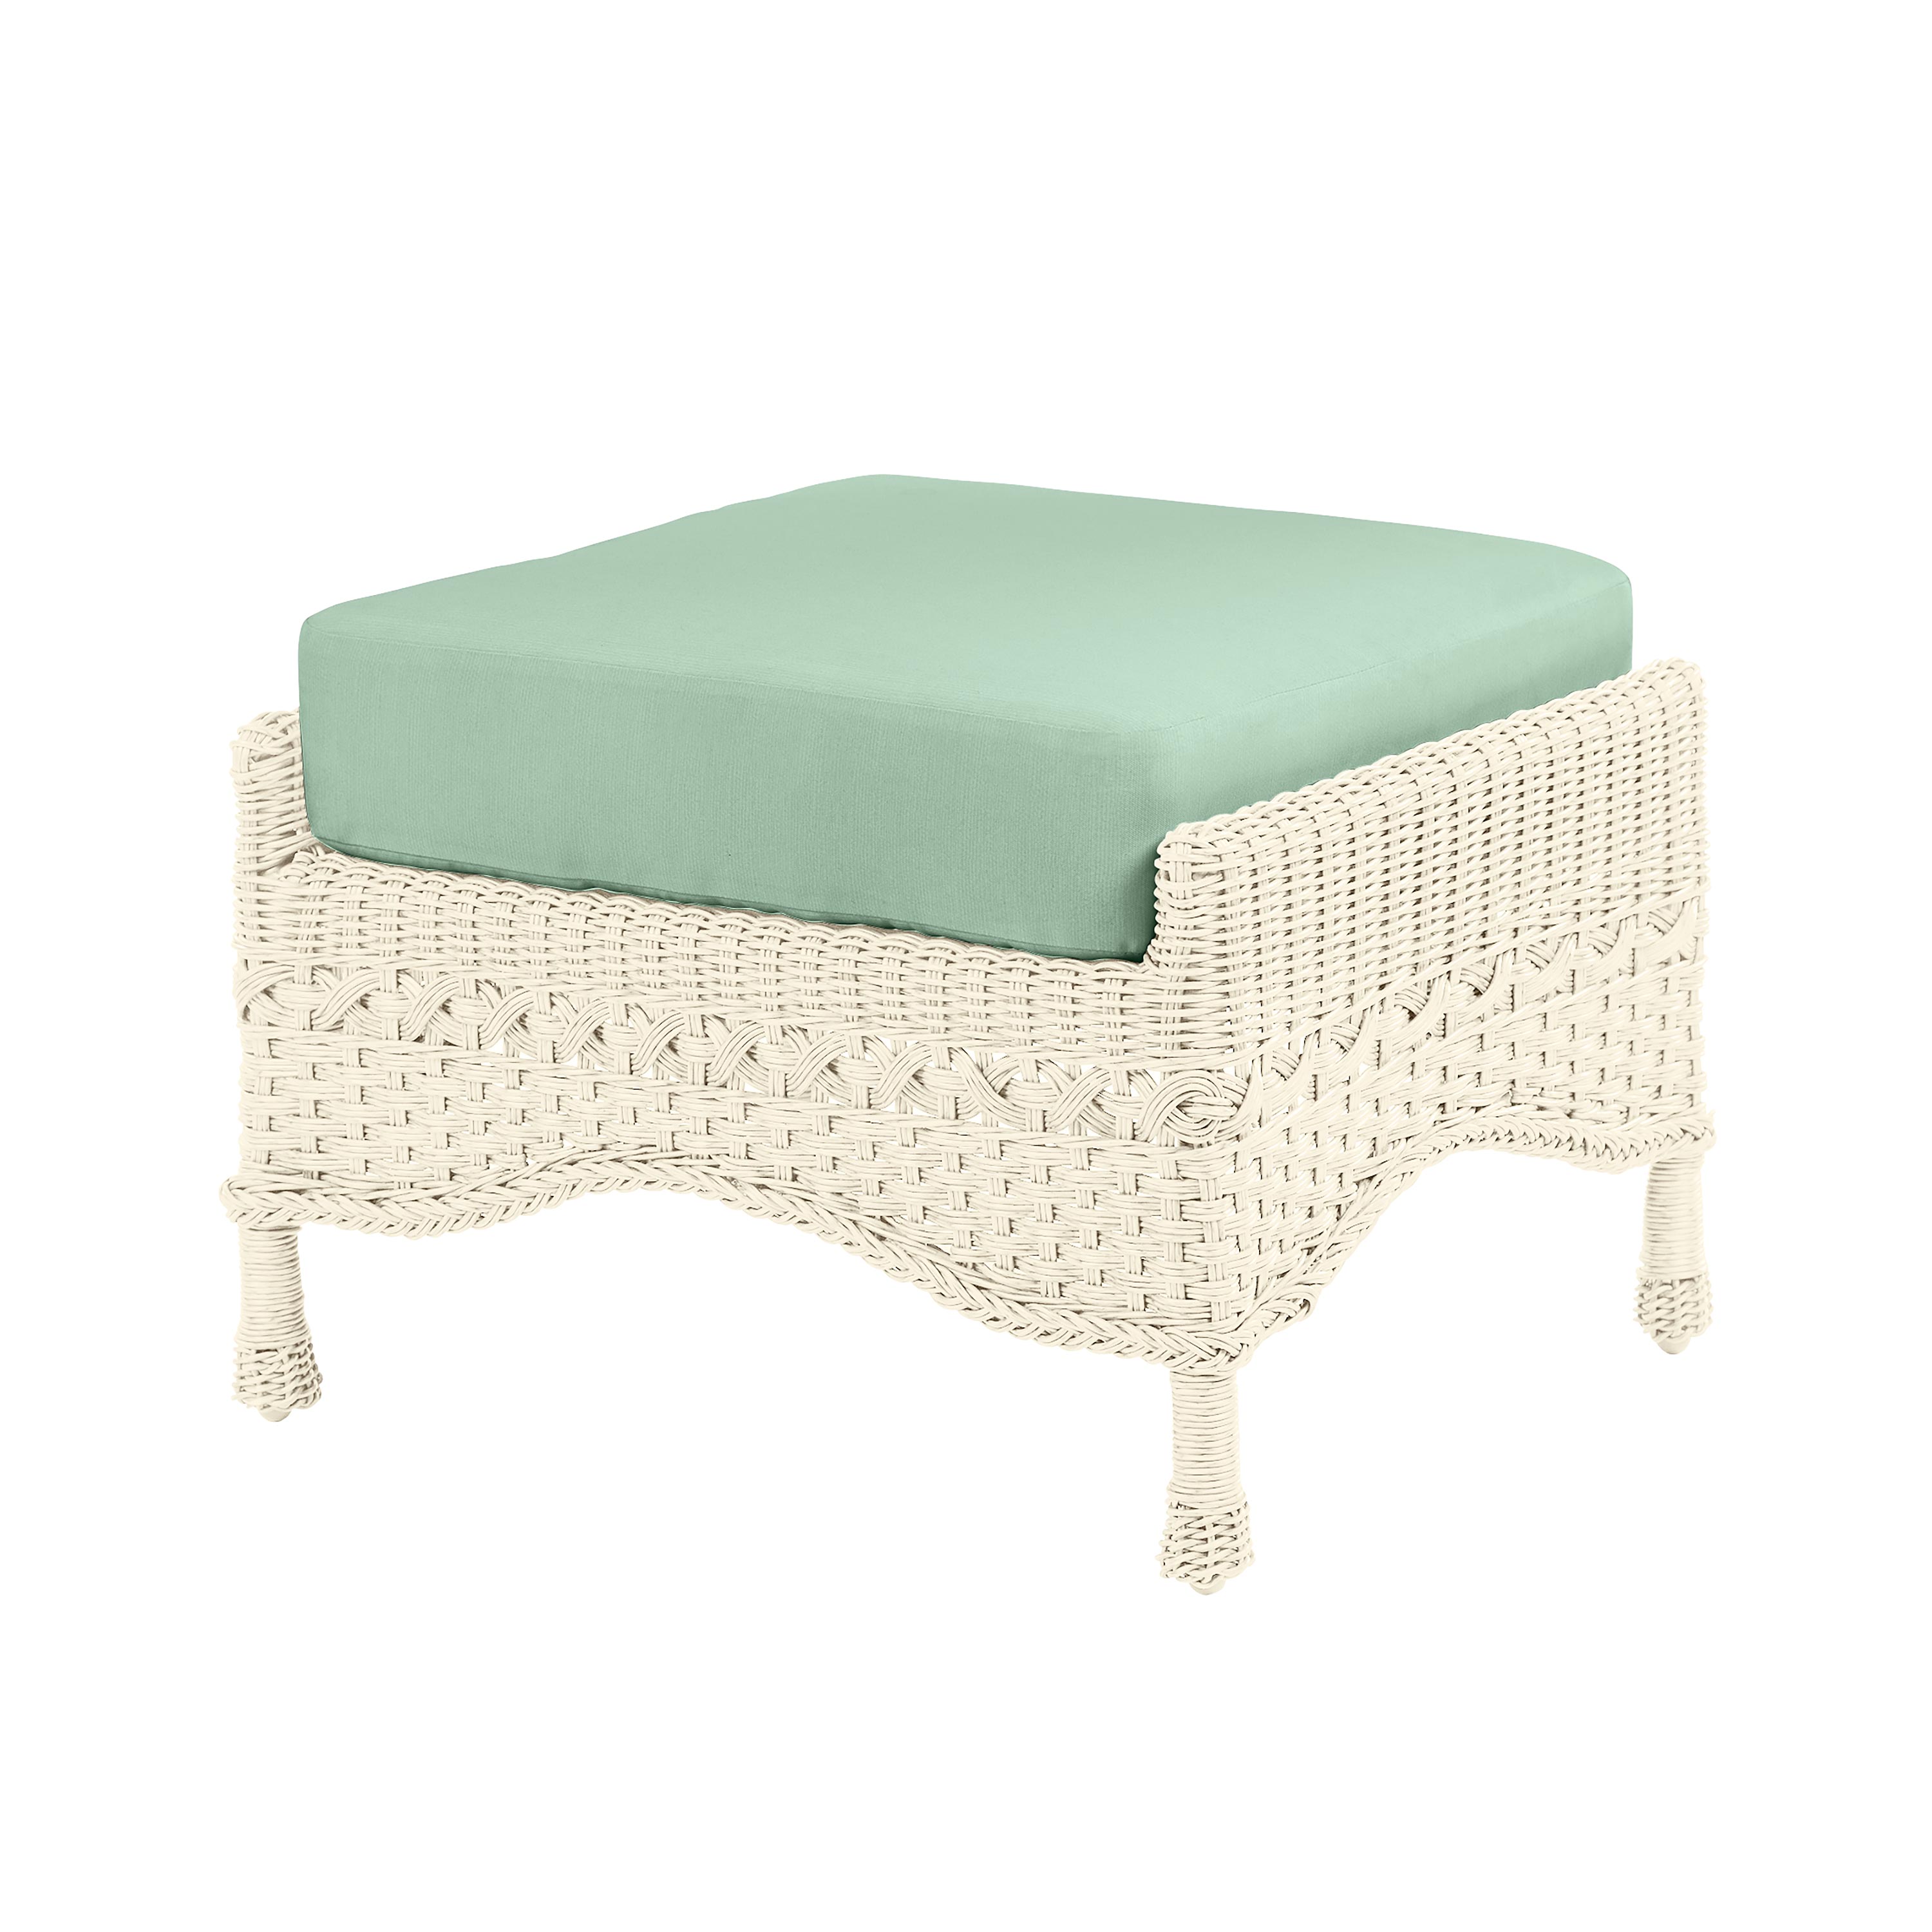 Prospect Hill Outdoor Wicker Deep Seating Ottoman with Cushion swatch image